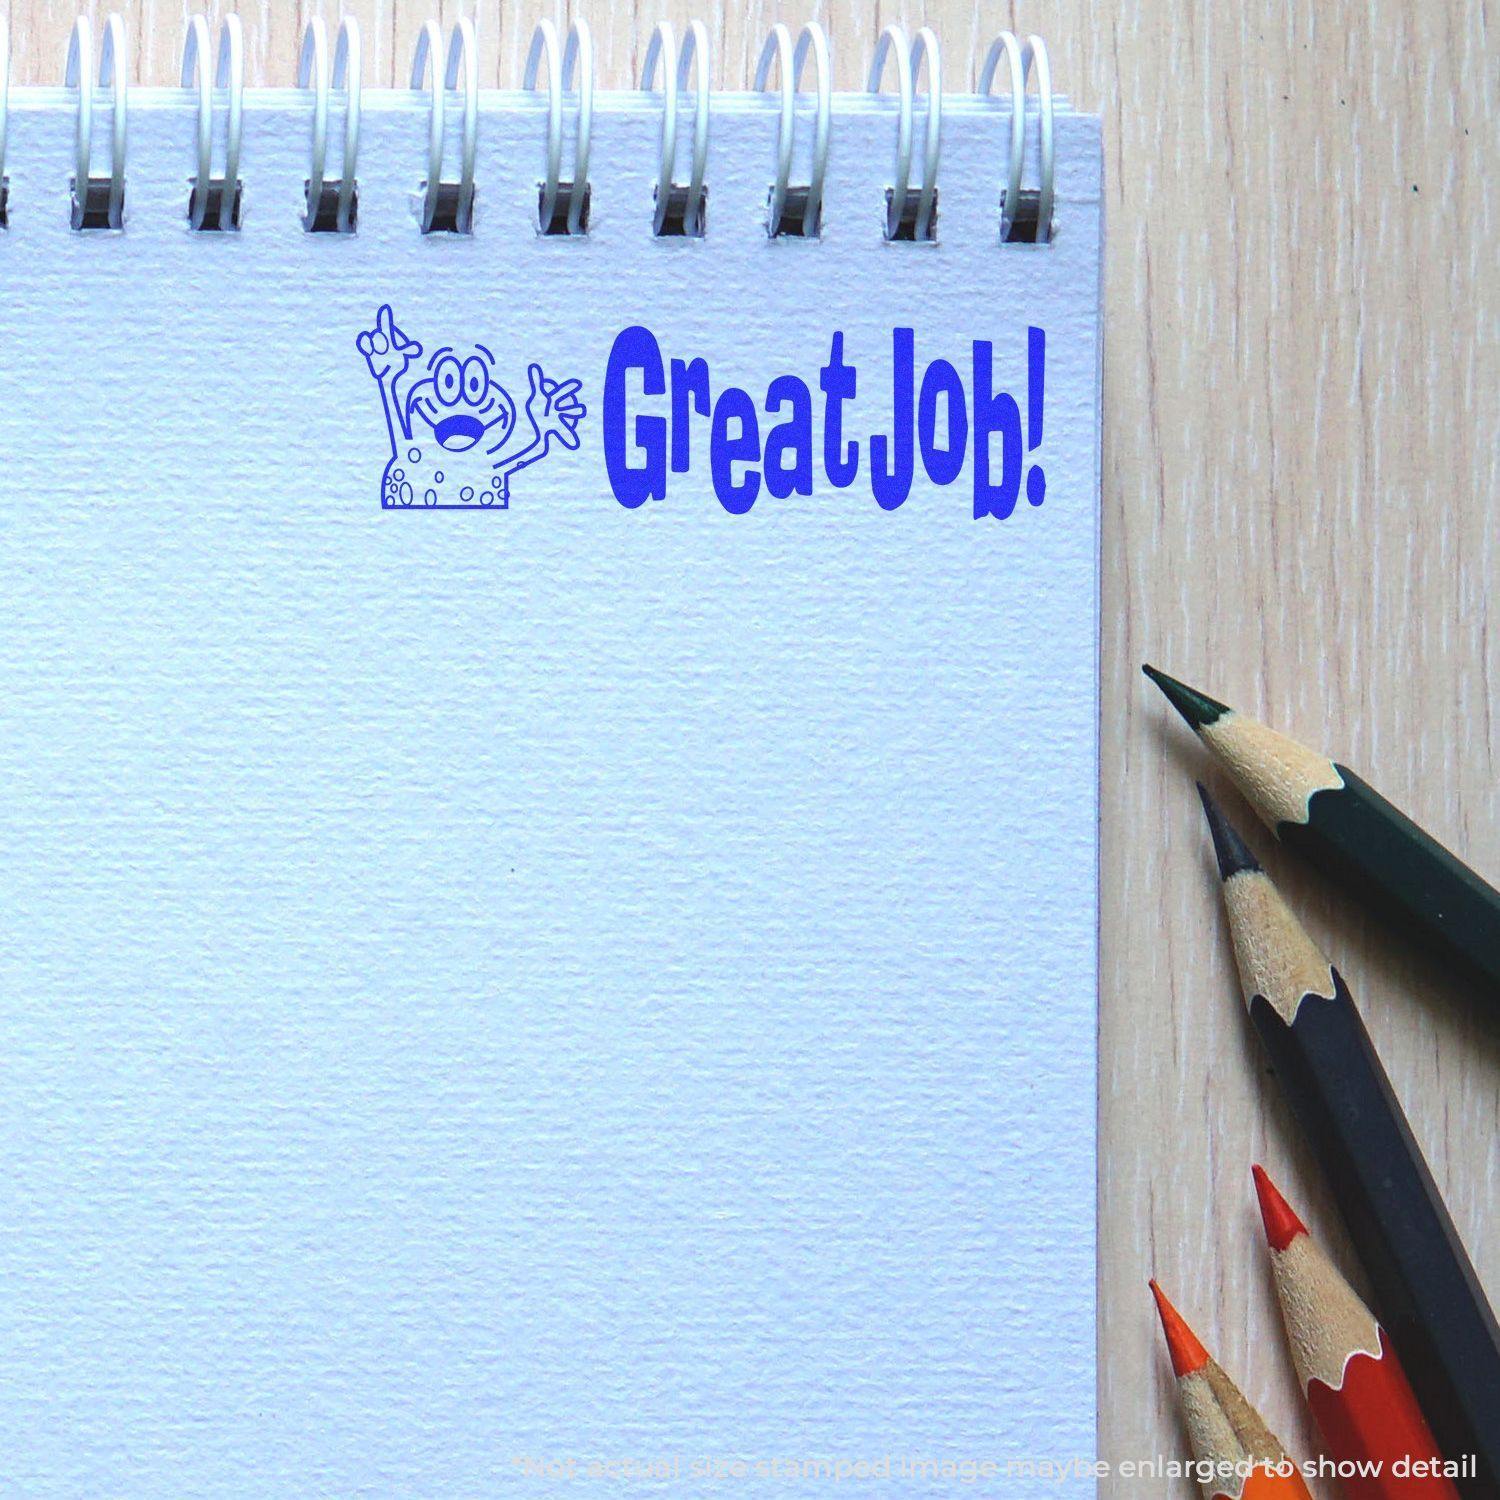 A stock office pre-inked stamp with a stamped image showing how the text "Great Job!" with a frog image whose hands are up in the air on the left side is displayed after stamping.